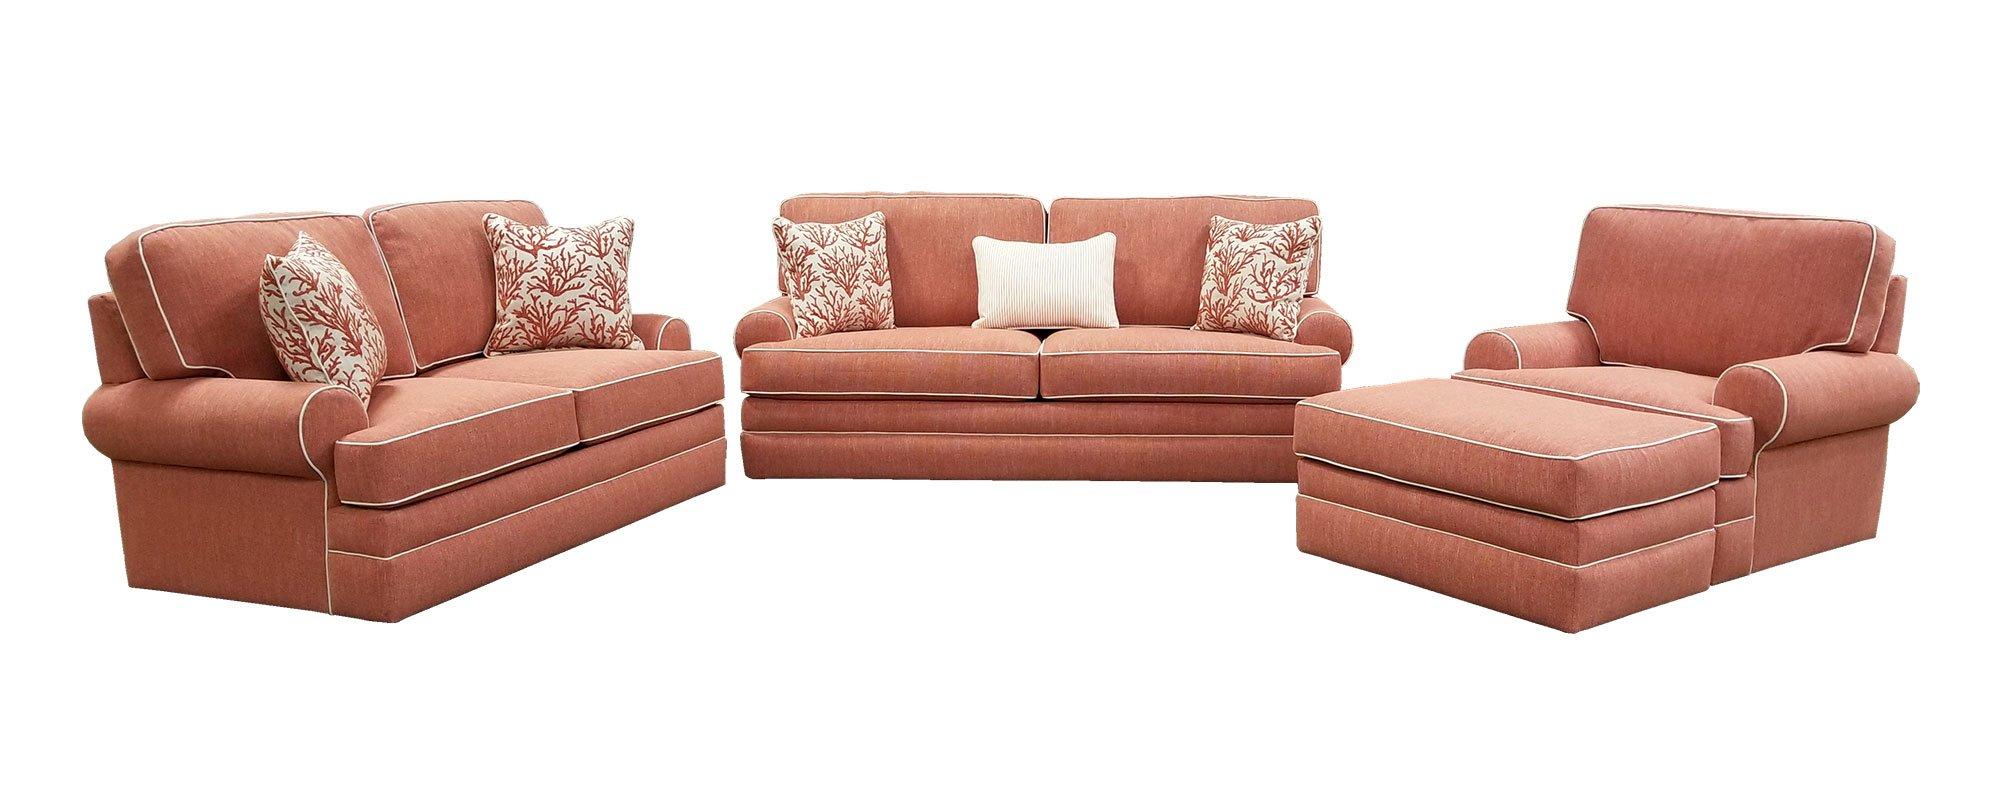 woodhaven hollywood living room set